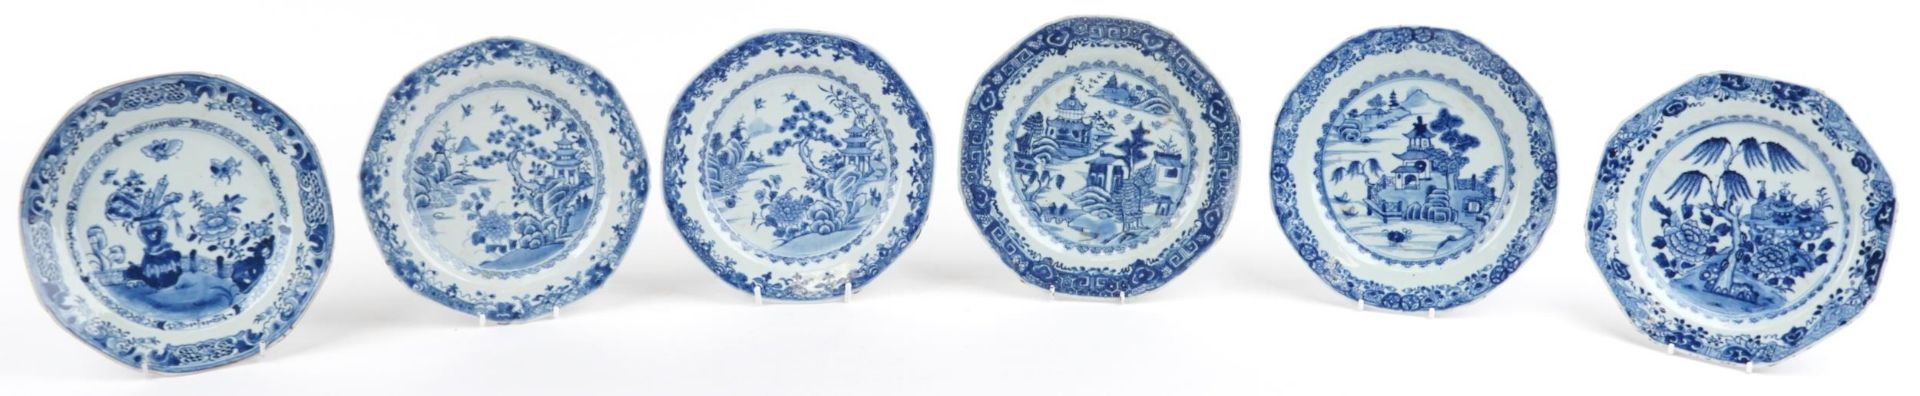 Six Chinese blue and white porcelain plates hand painted with river landscapes and flowers, each